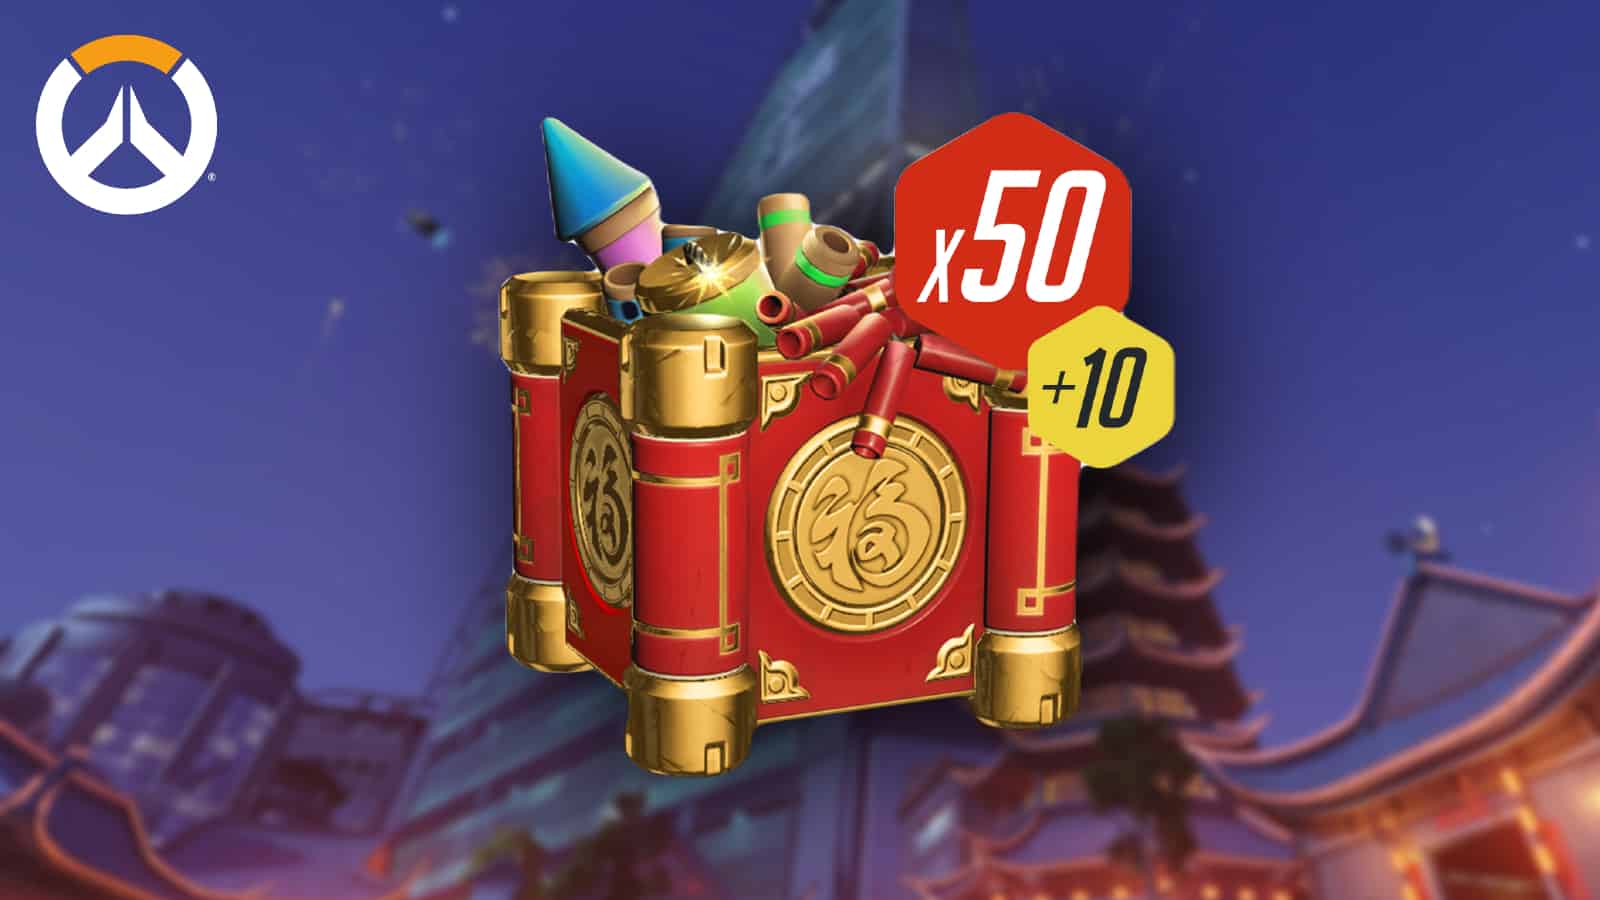 overwatch lunar new year loot box on lijiang tower background